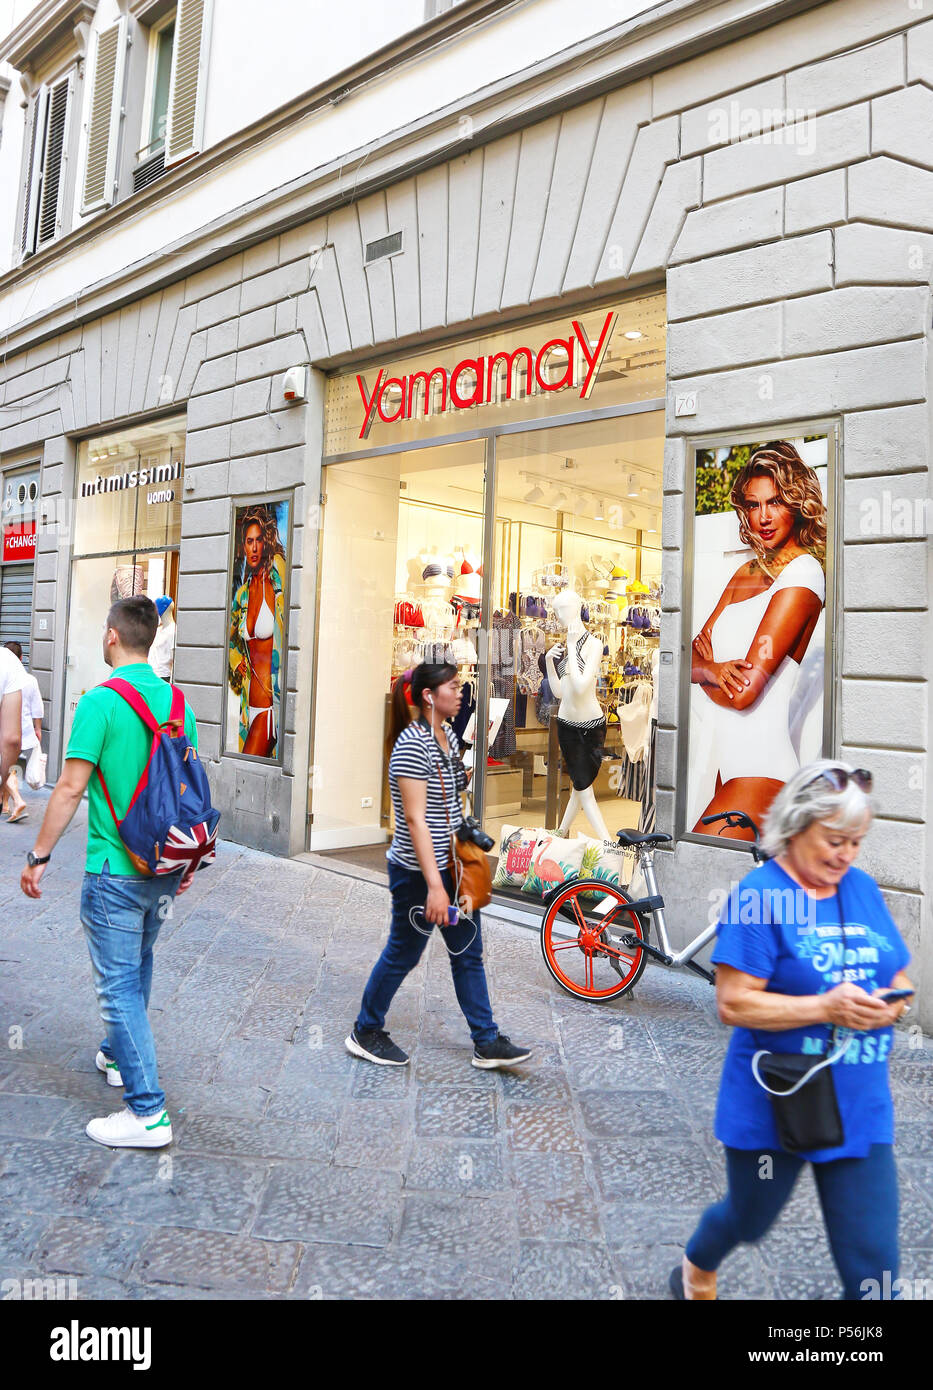 fashion shops at Florence or Firenze city Italy - Yamamay store Stock Photo  - Alamy